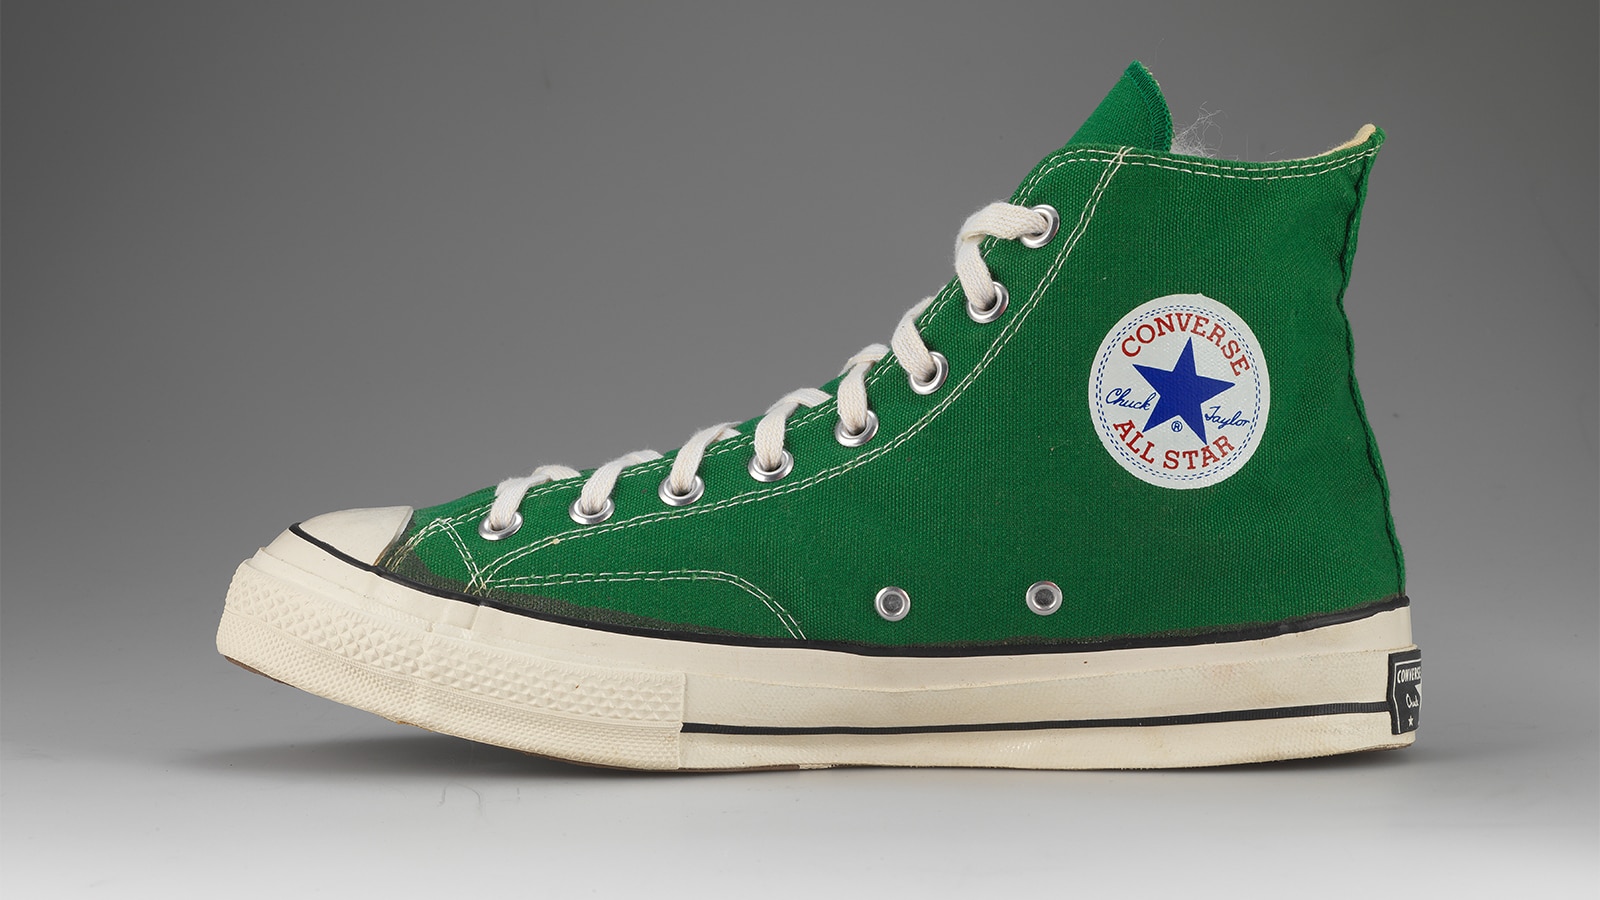 converse all star history